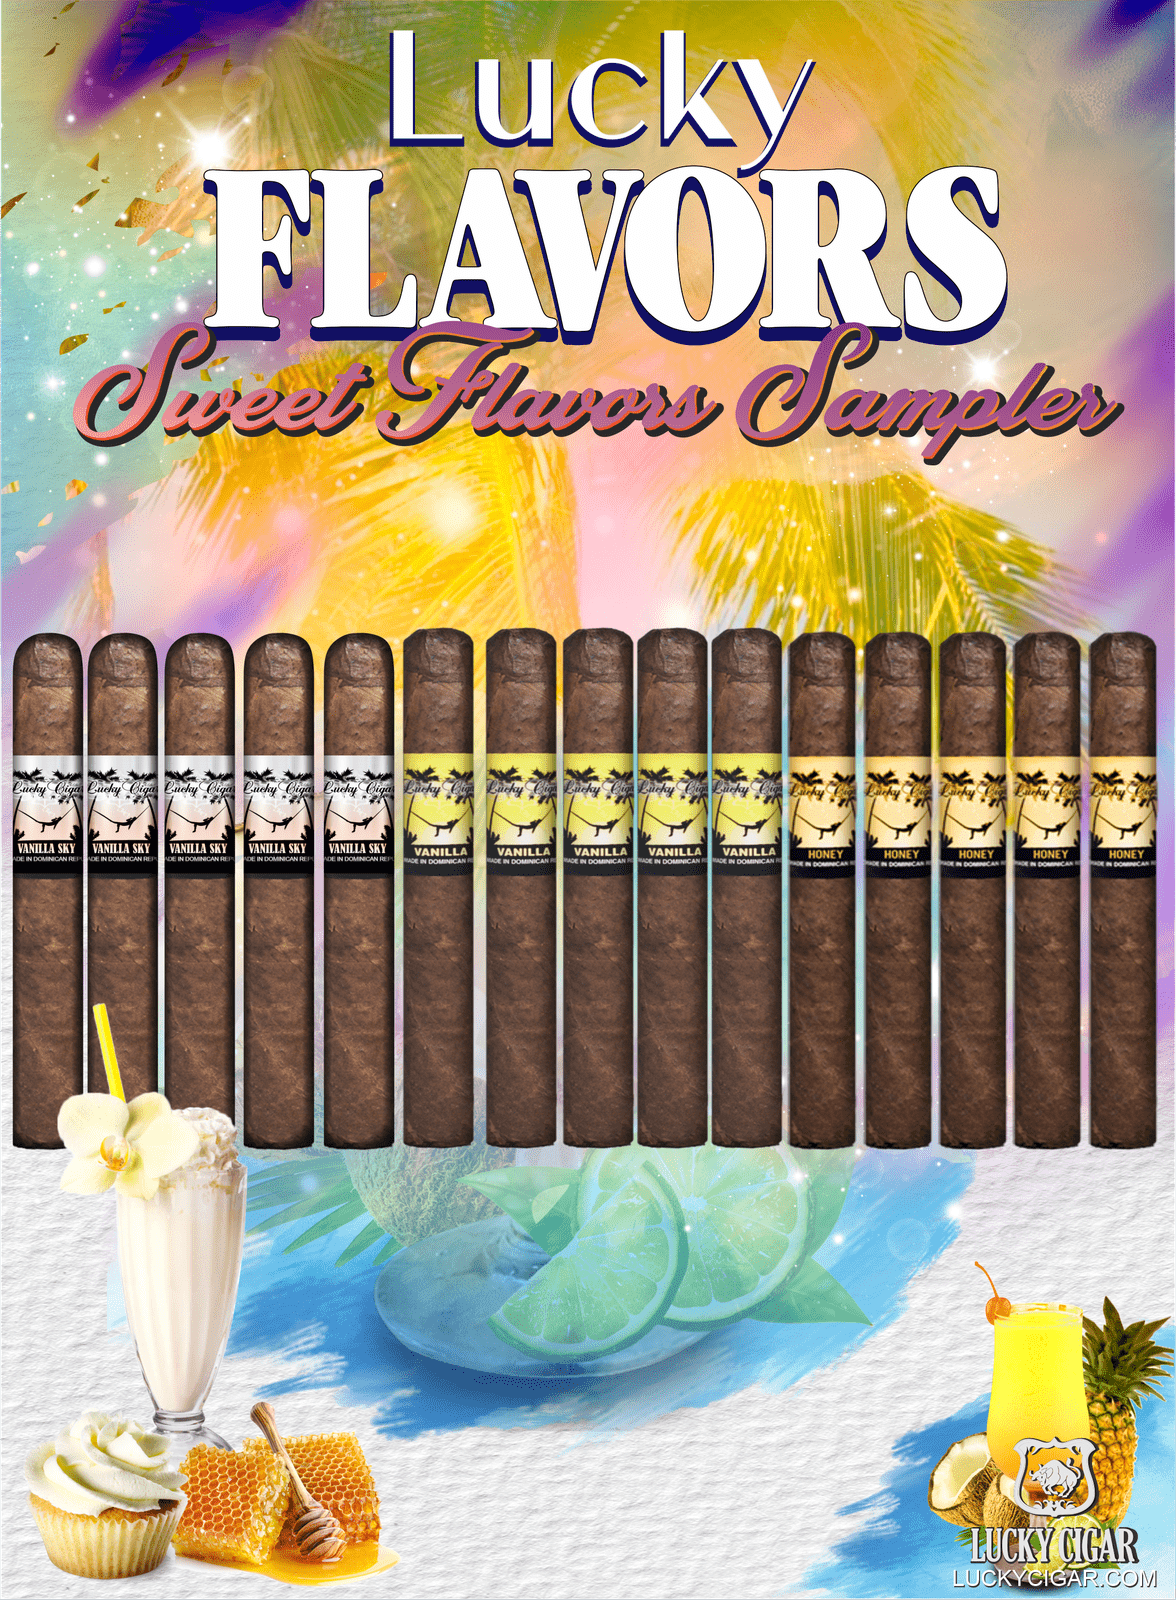 Flavored Cigars: Lucky Flavors 15 Piece Sweets Sampler - Vanilla Sky, Vanilla, Honey 5 Vanilla Sky 5x42 Cigars 5 Vanilla 5x42 Cigars 5 Honey 5x42 Cigars